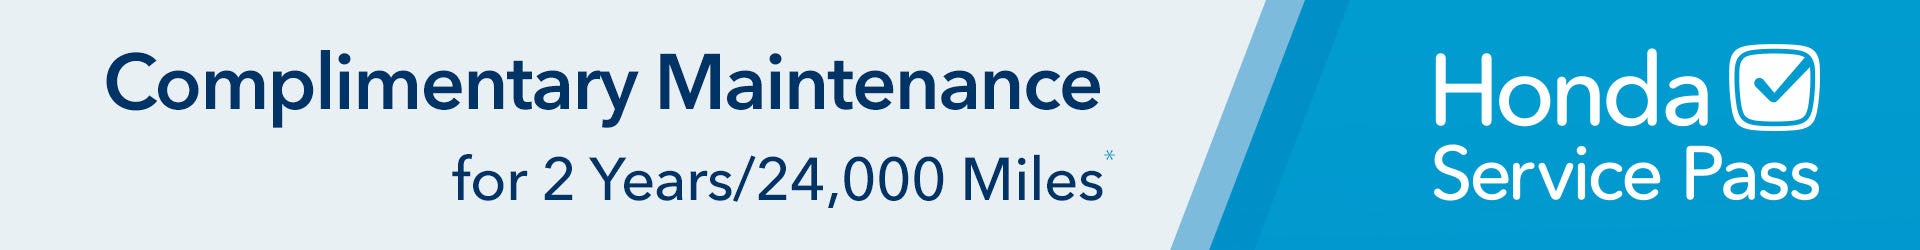 Complimentary Maintenance for 2 years / 24,000 Miles Honda Service Pass | Honda of New Rochelle in New Rochelle NY